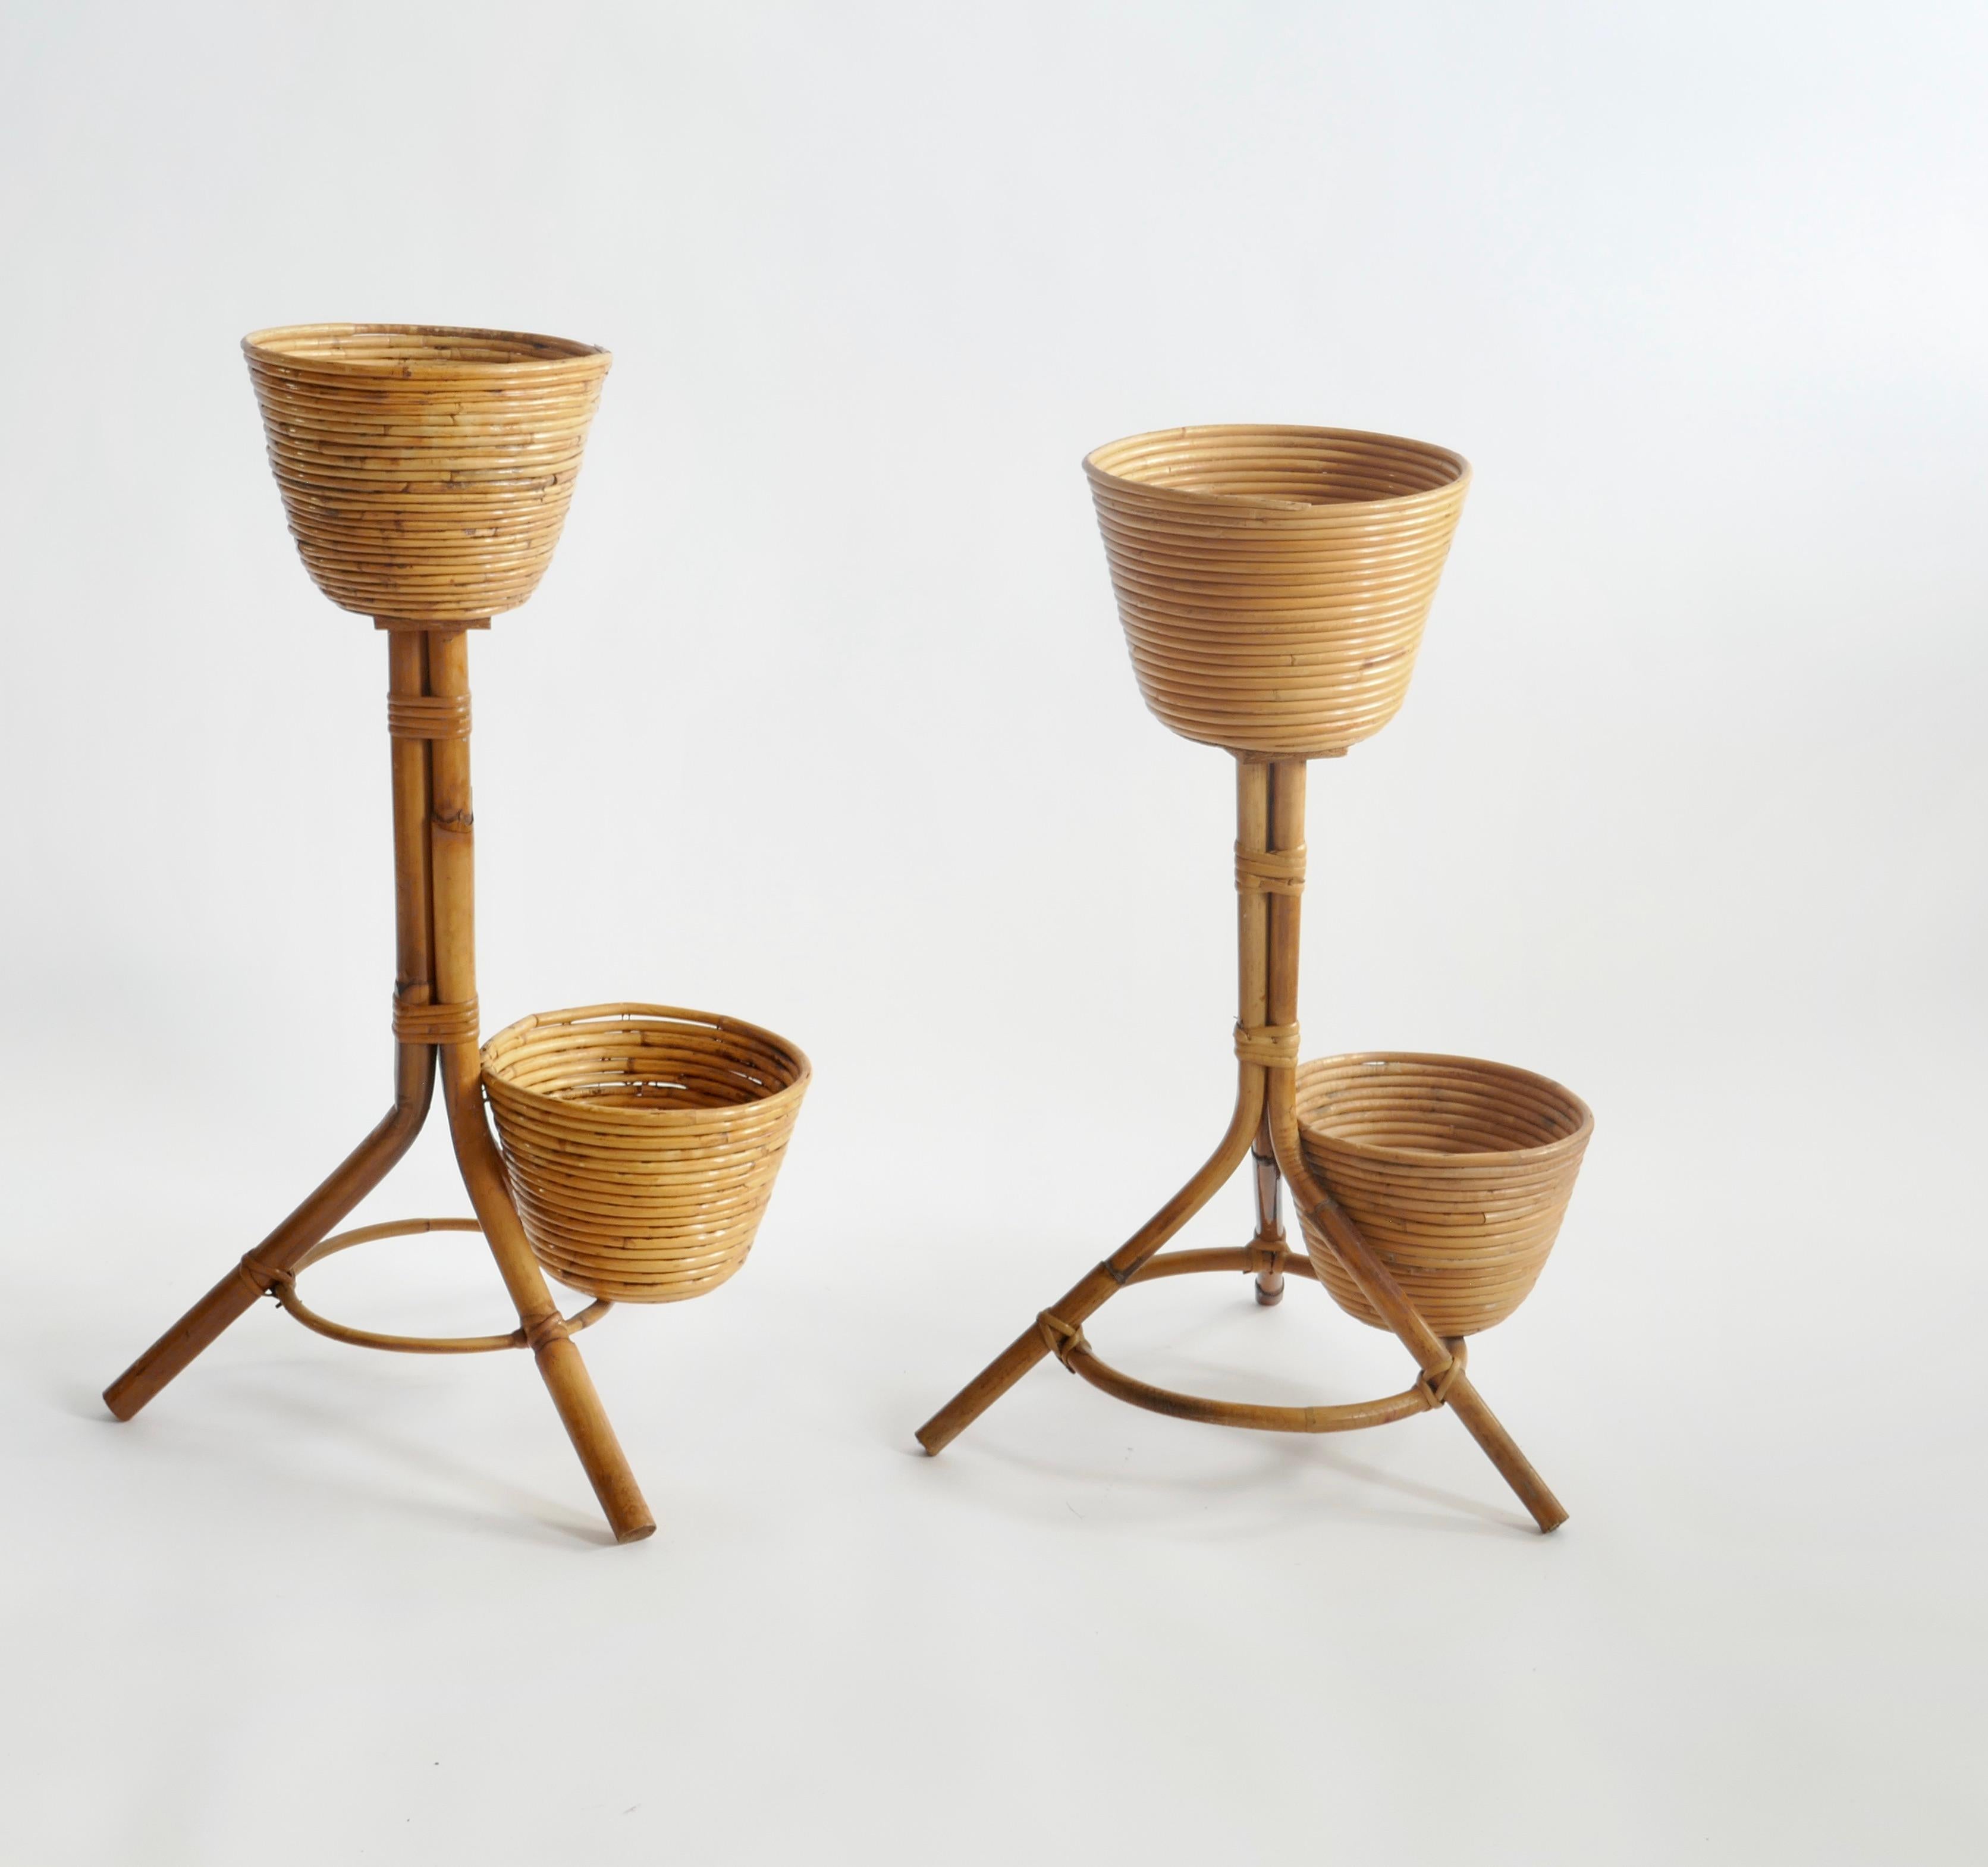 Set of 2 Bamboo and Rattan Plant Holders, Italy 1950s In Good Condition For Sale In London, GB